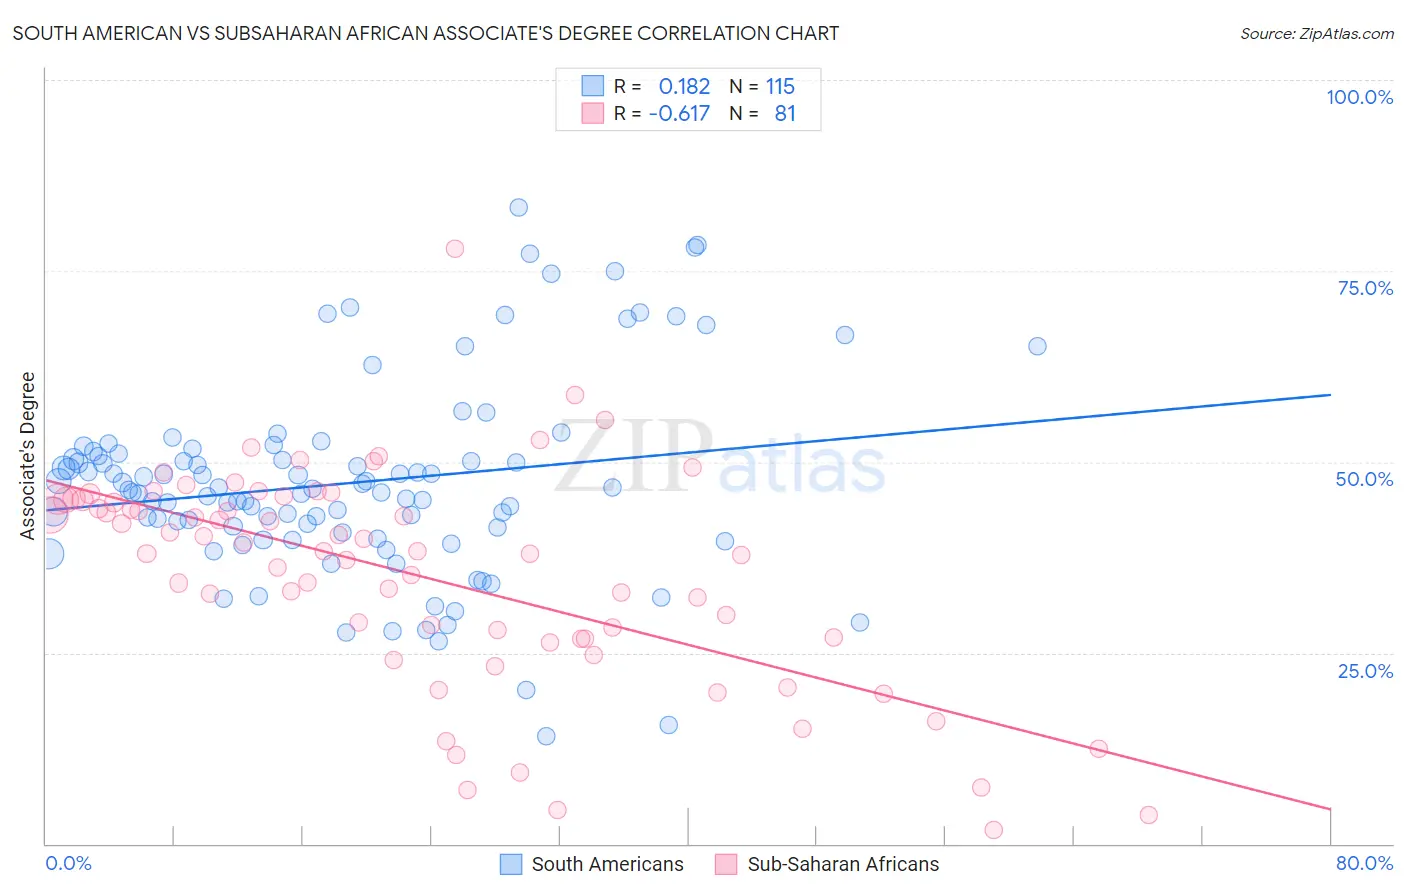 South American vs Subsaharan African Associate's Degree